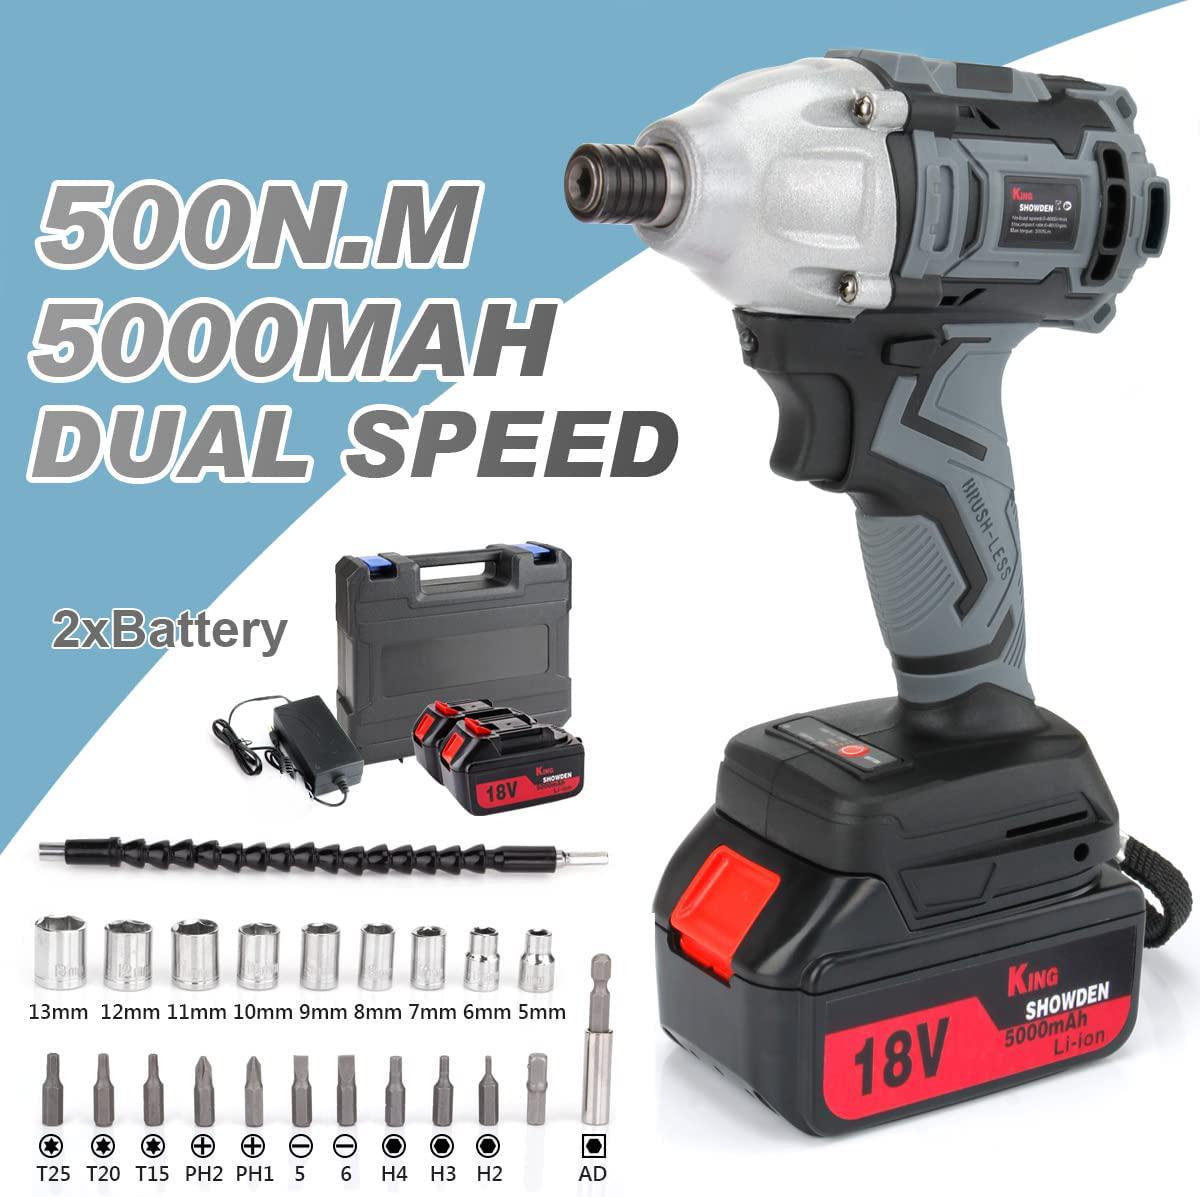 King showden, King showden Impact Driver with 2 Battery, Cordless Impact Driver 18V 5,000mAH Lithium Battery, 500Nm High Torque, Dual Speed Automatic Power Tool, 9 Sockets,12 Drilling bit, Carry Case